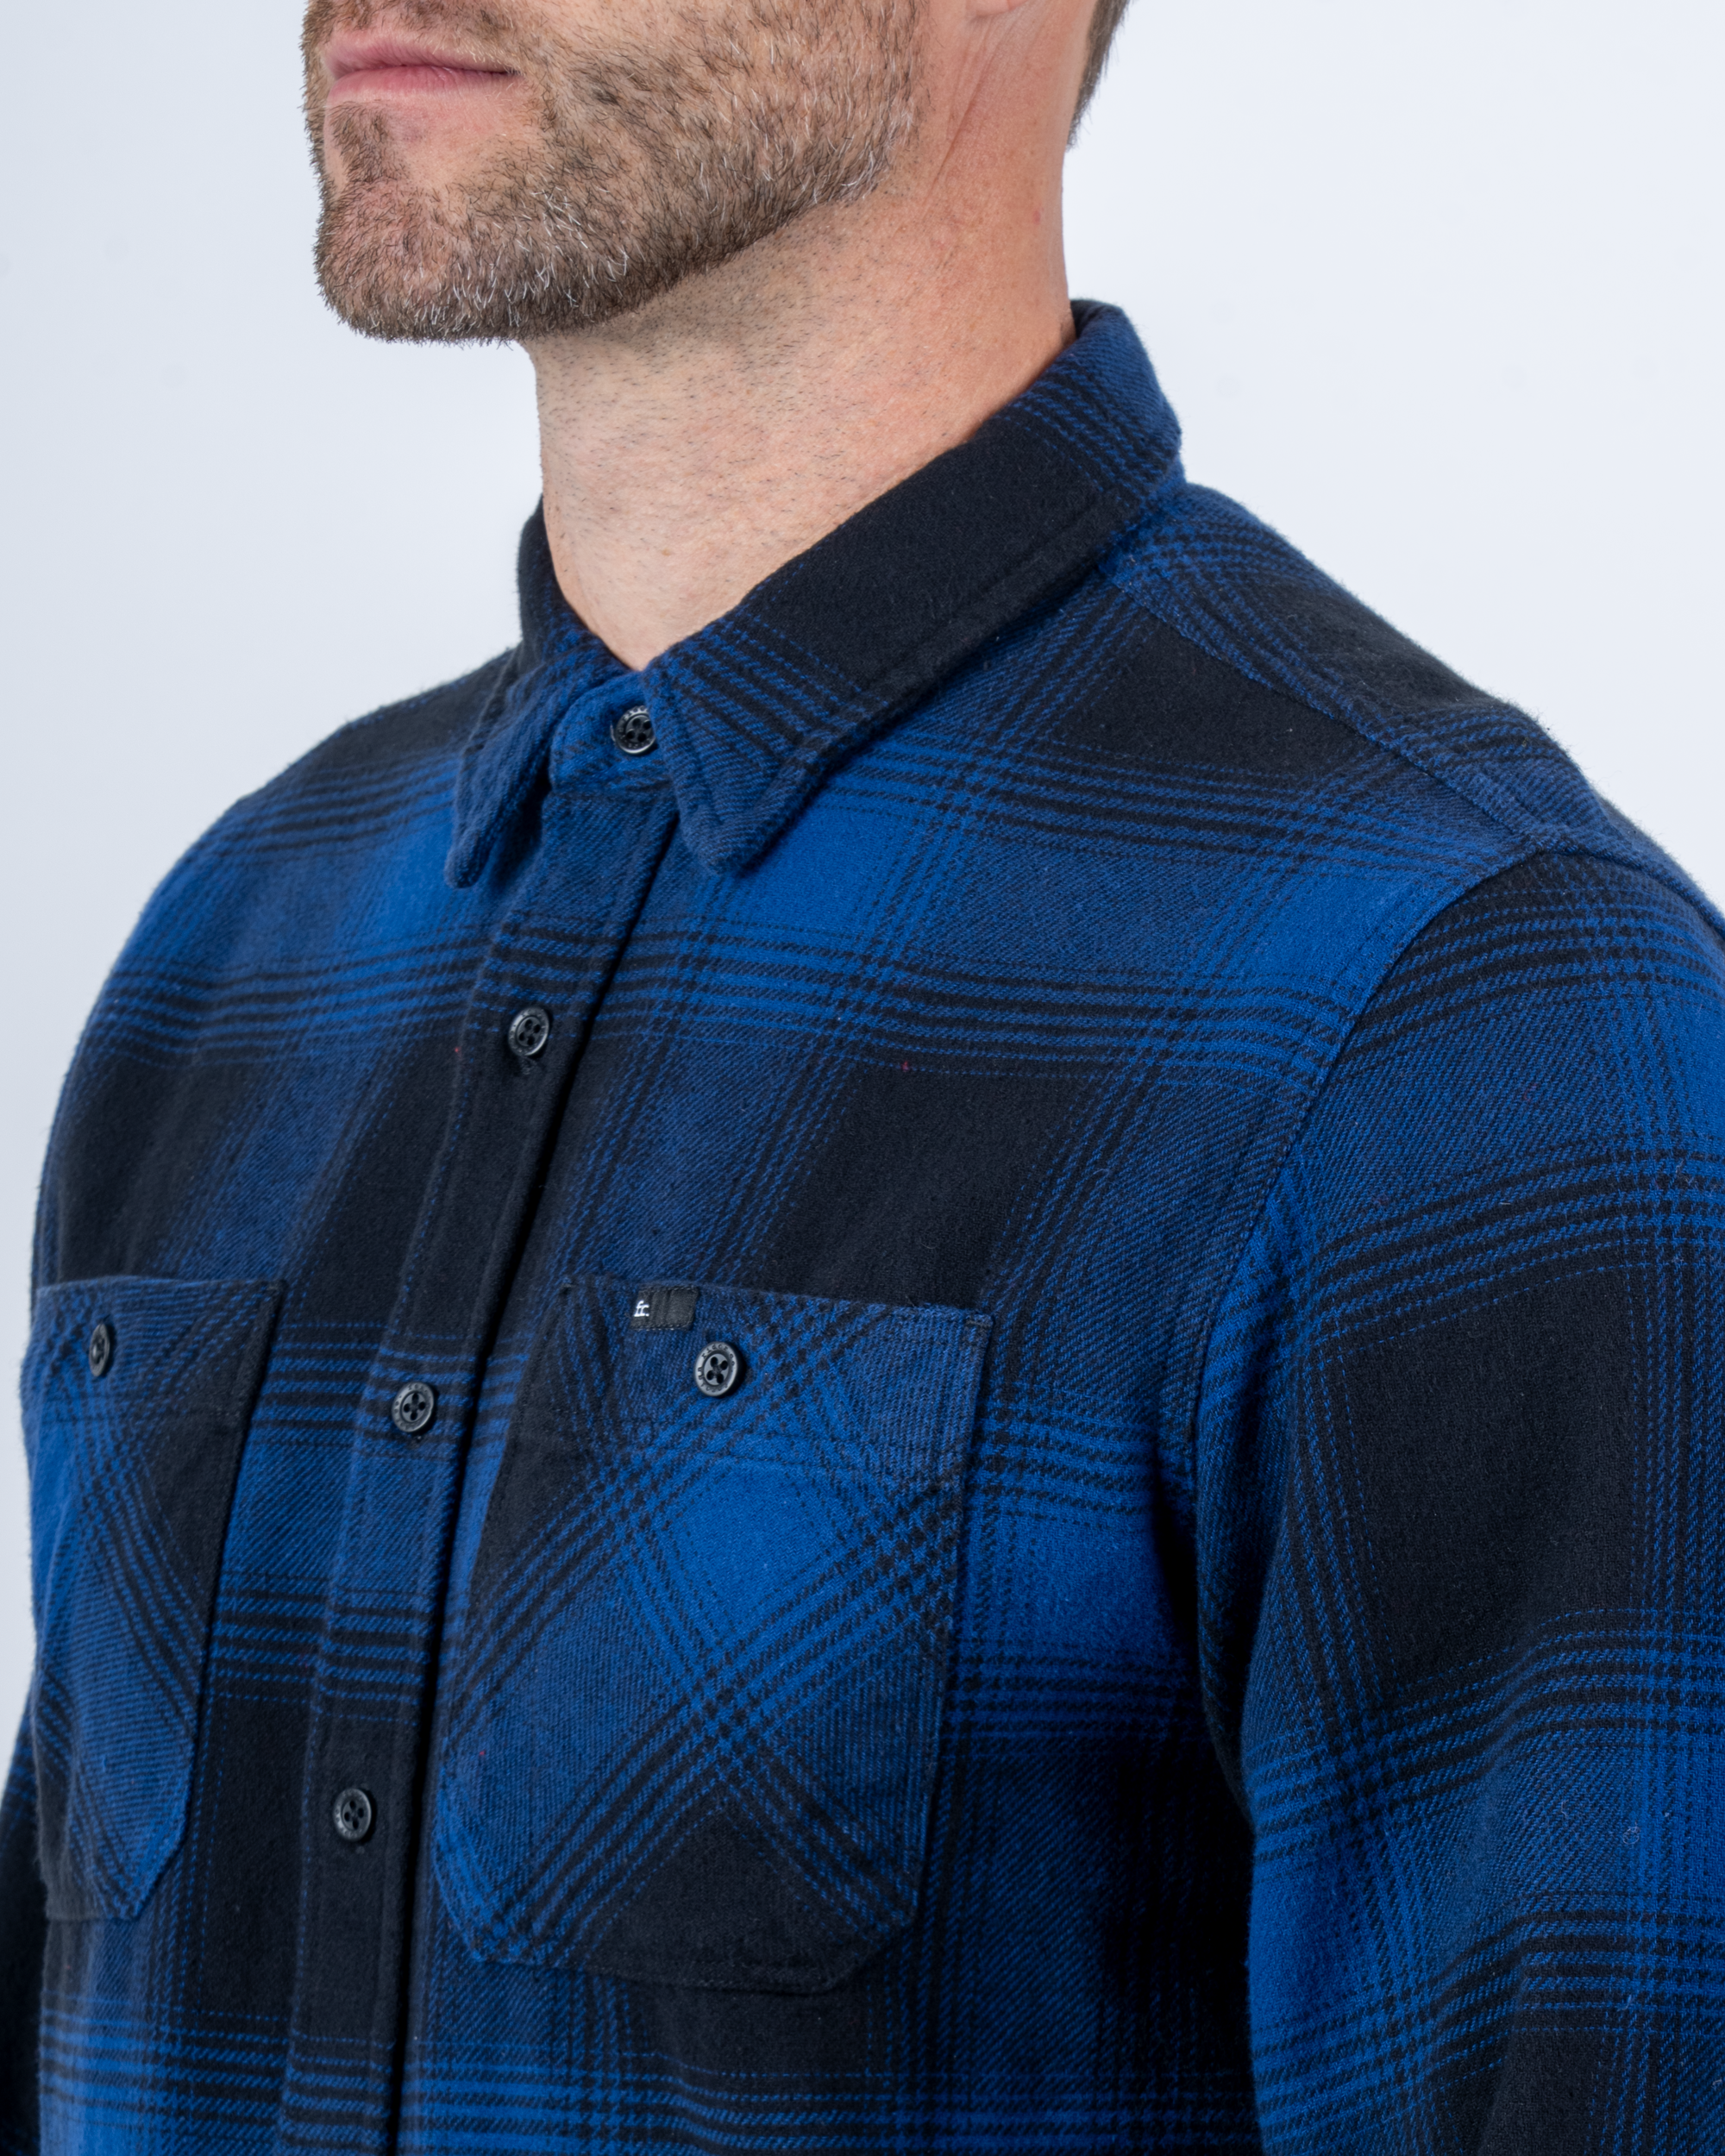 Foreign Rider Co Organic Cotton Blue Flannel Plaid Long Sleeve Button Up Shirt Chest Button Pocket and Shoulder Detail